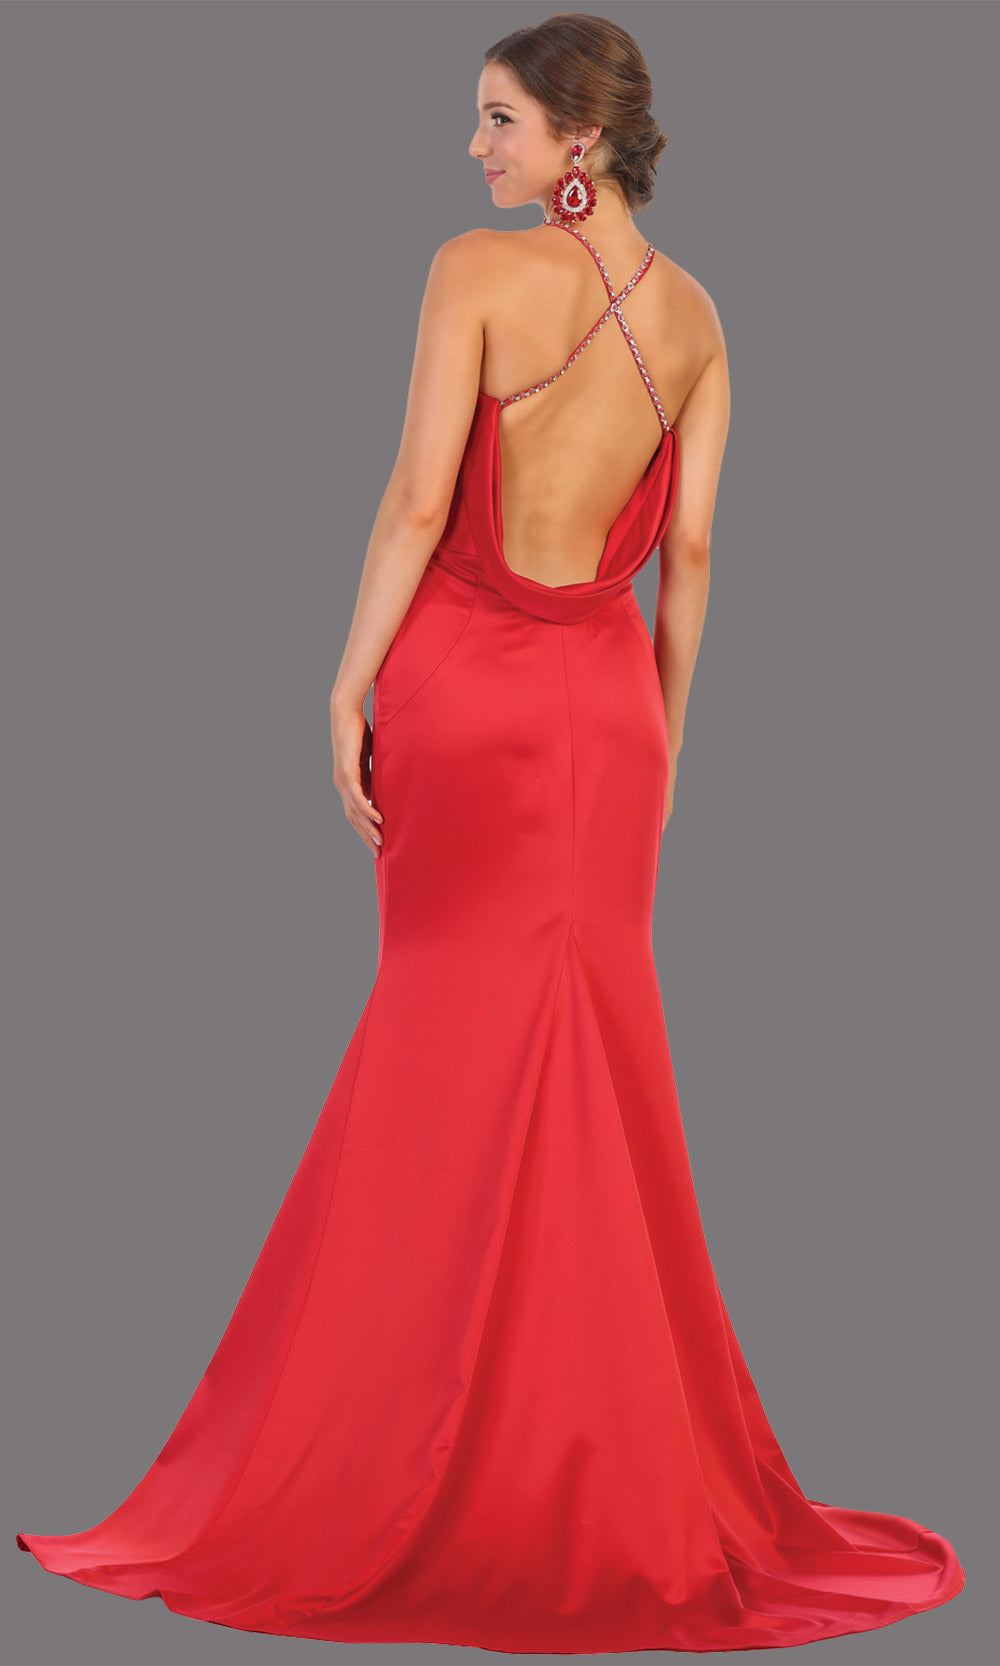 Mayqueen MQ1779 long red v neck fitted satin dress with open back & train. Perfect for prom, engagement dress, e-shoot dress, formal wedding guest dress, gala. Plus sizes avail in this red sleek & sexy dress.jpg